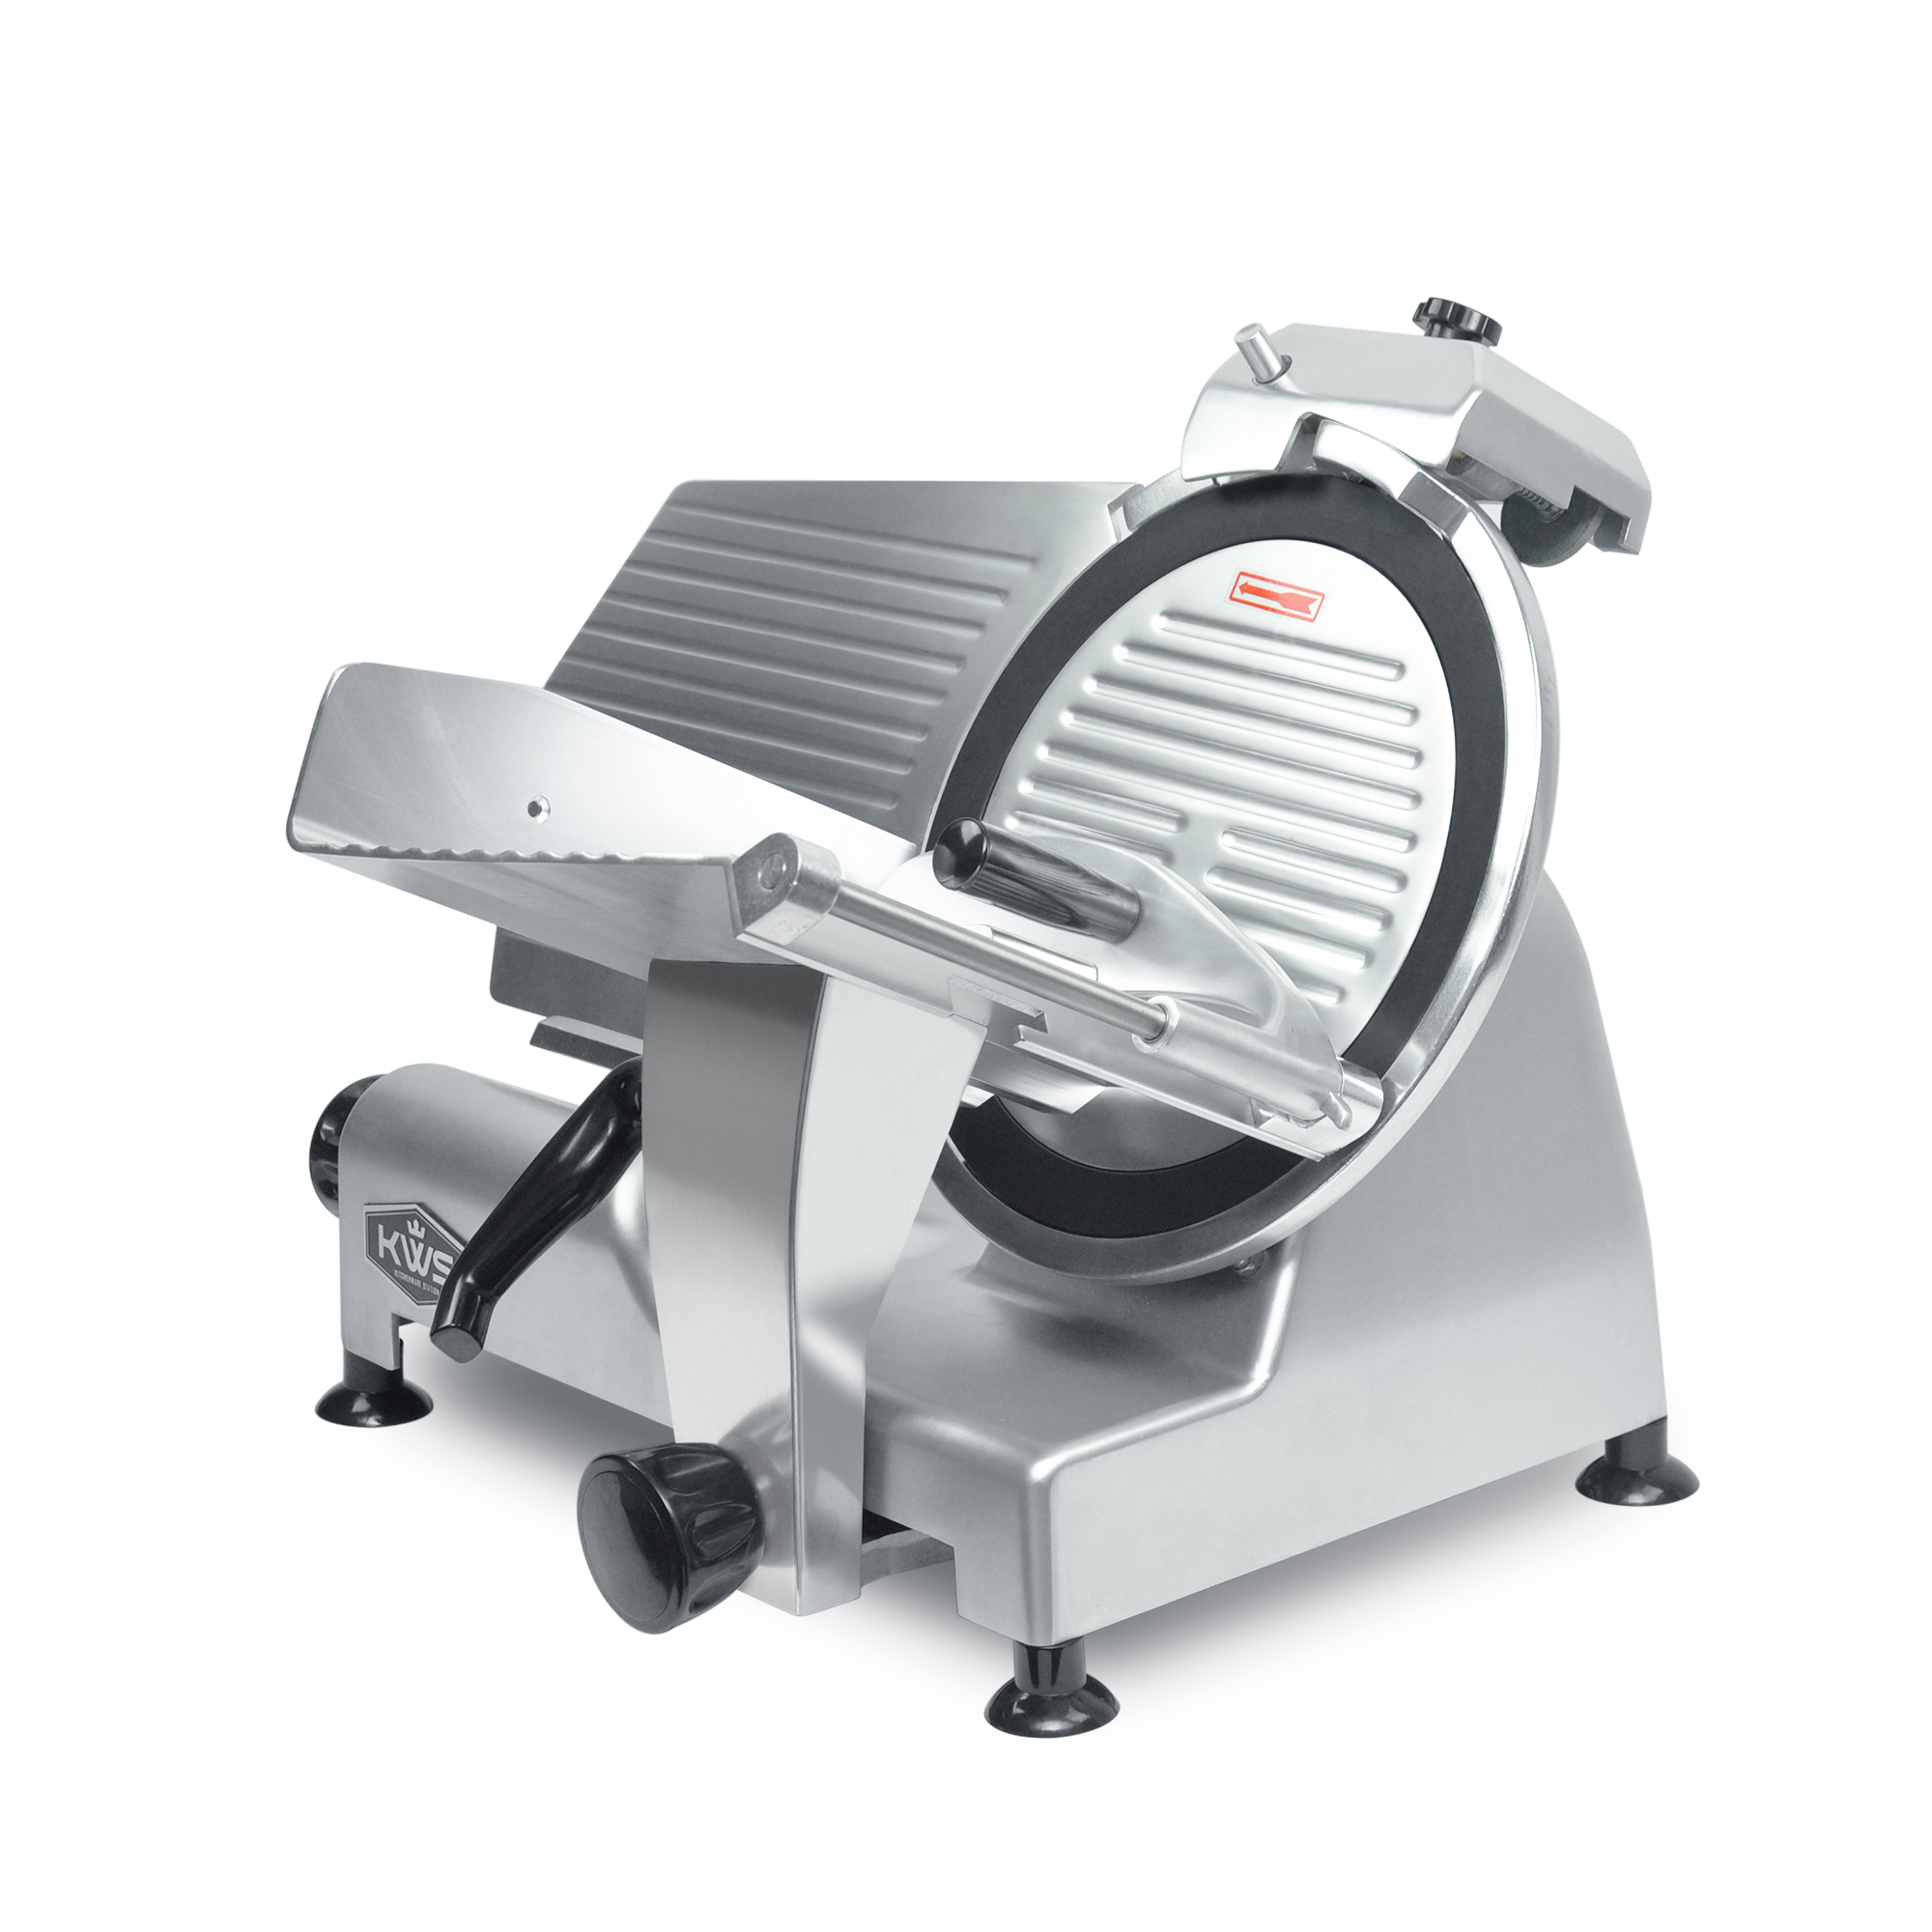 MS-12NT 12 Commercial Meat Slicer with Teflon Blade - KWS®